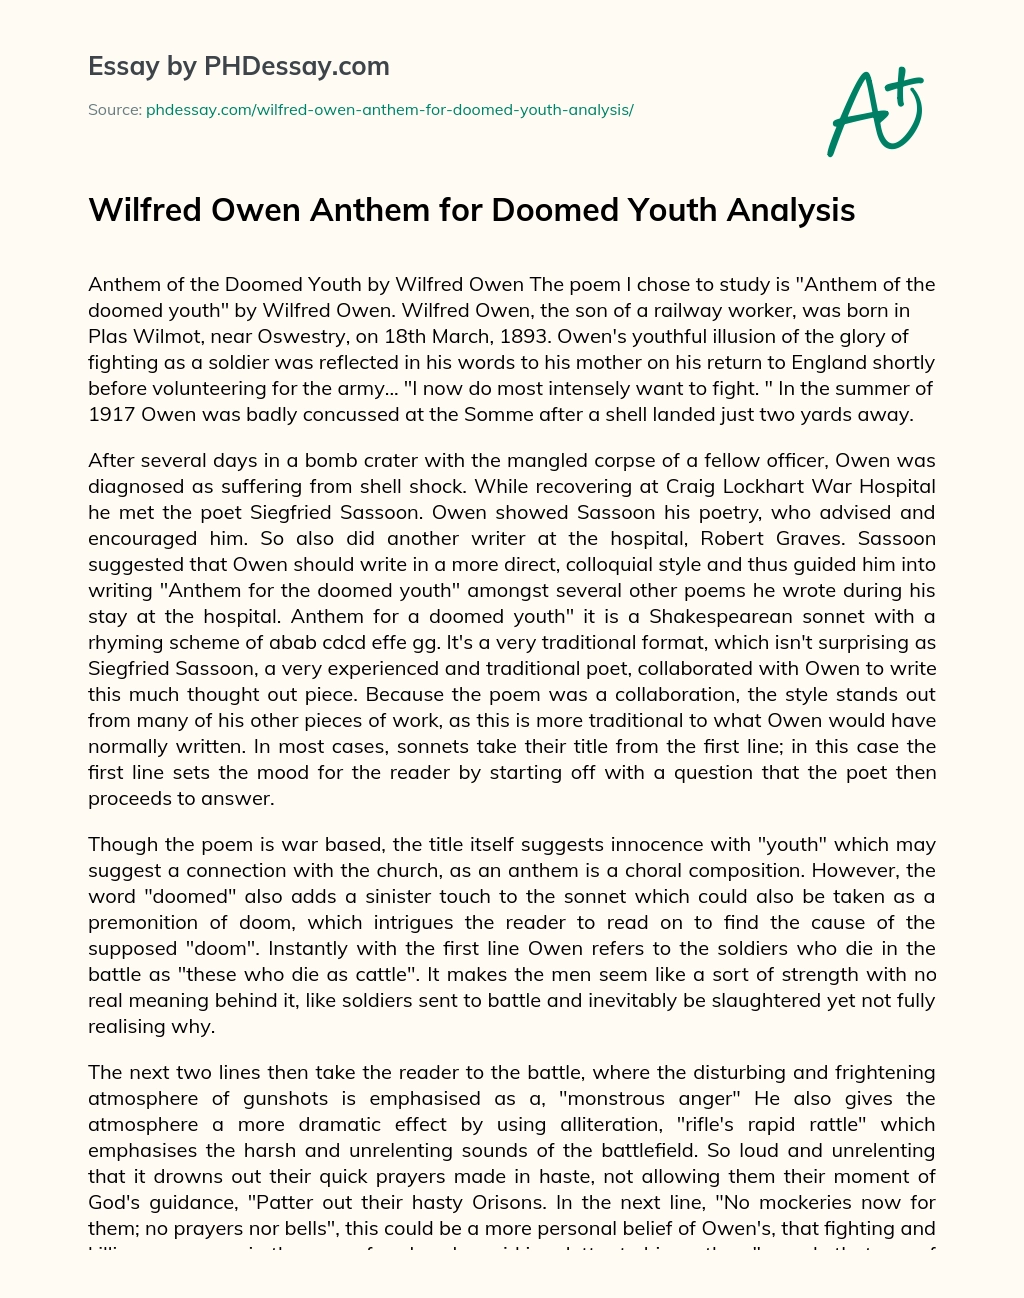 Wilfred Owen Anthem for Doomed Youth Analysis essay